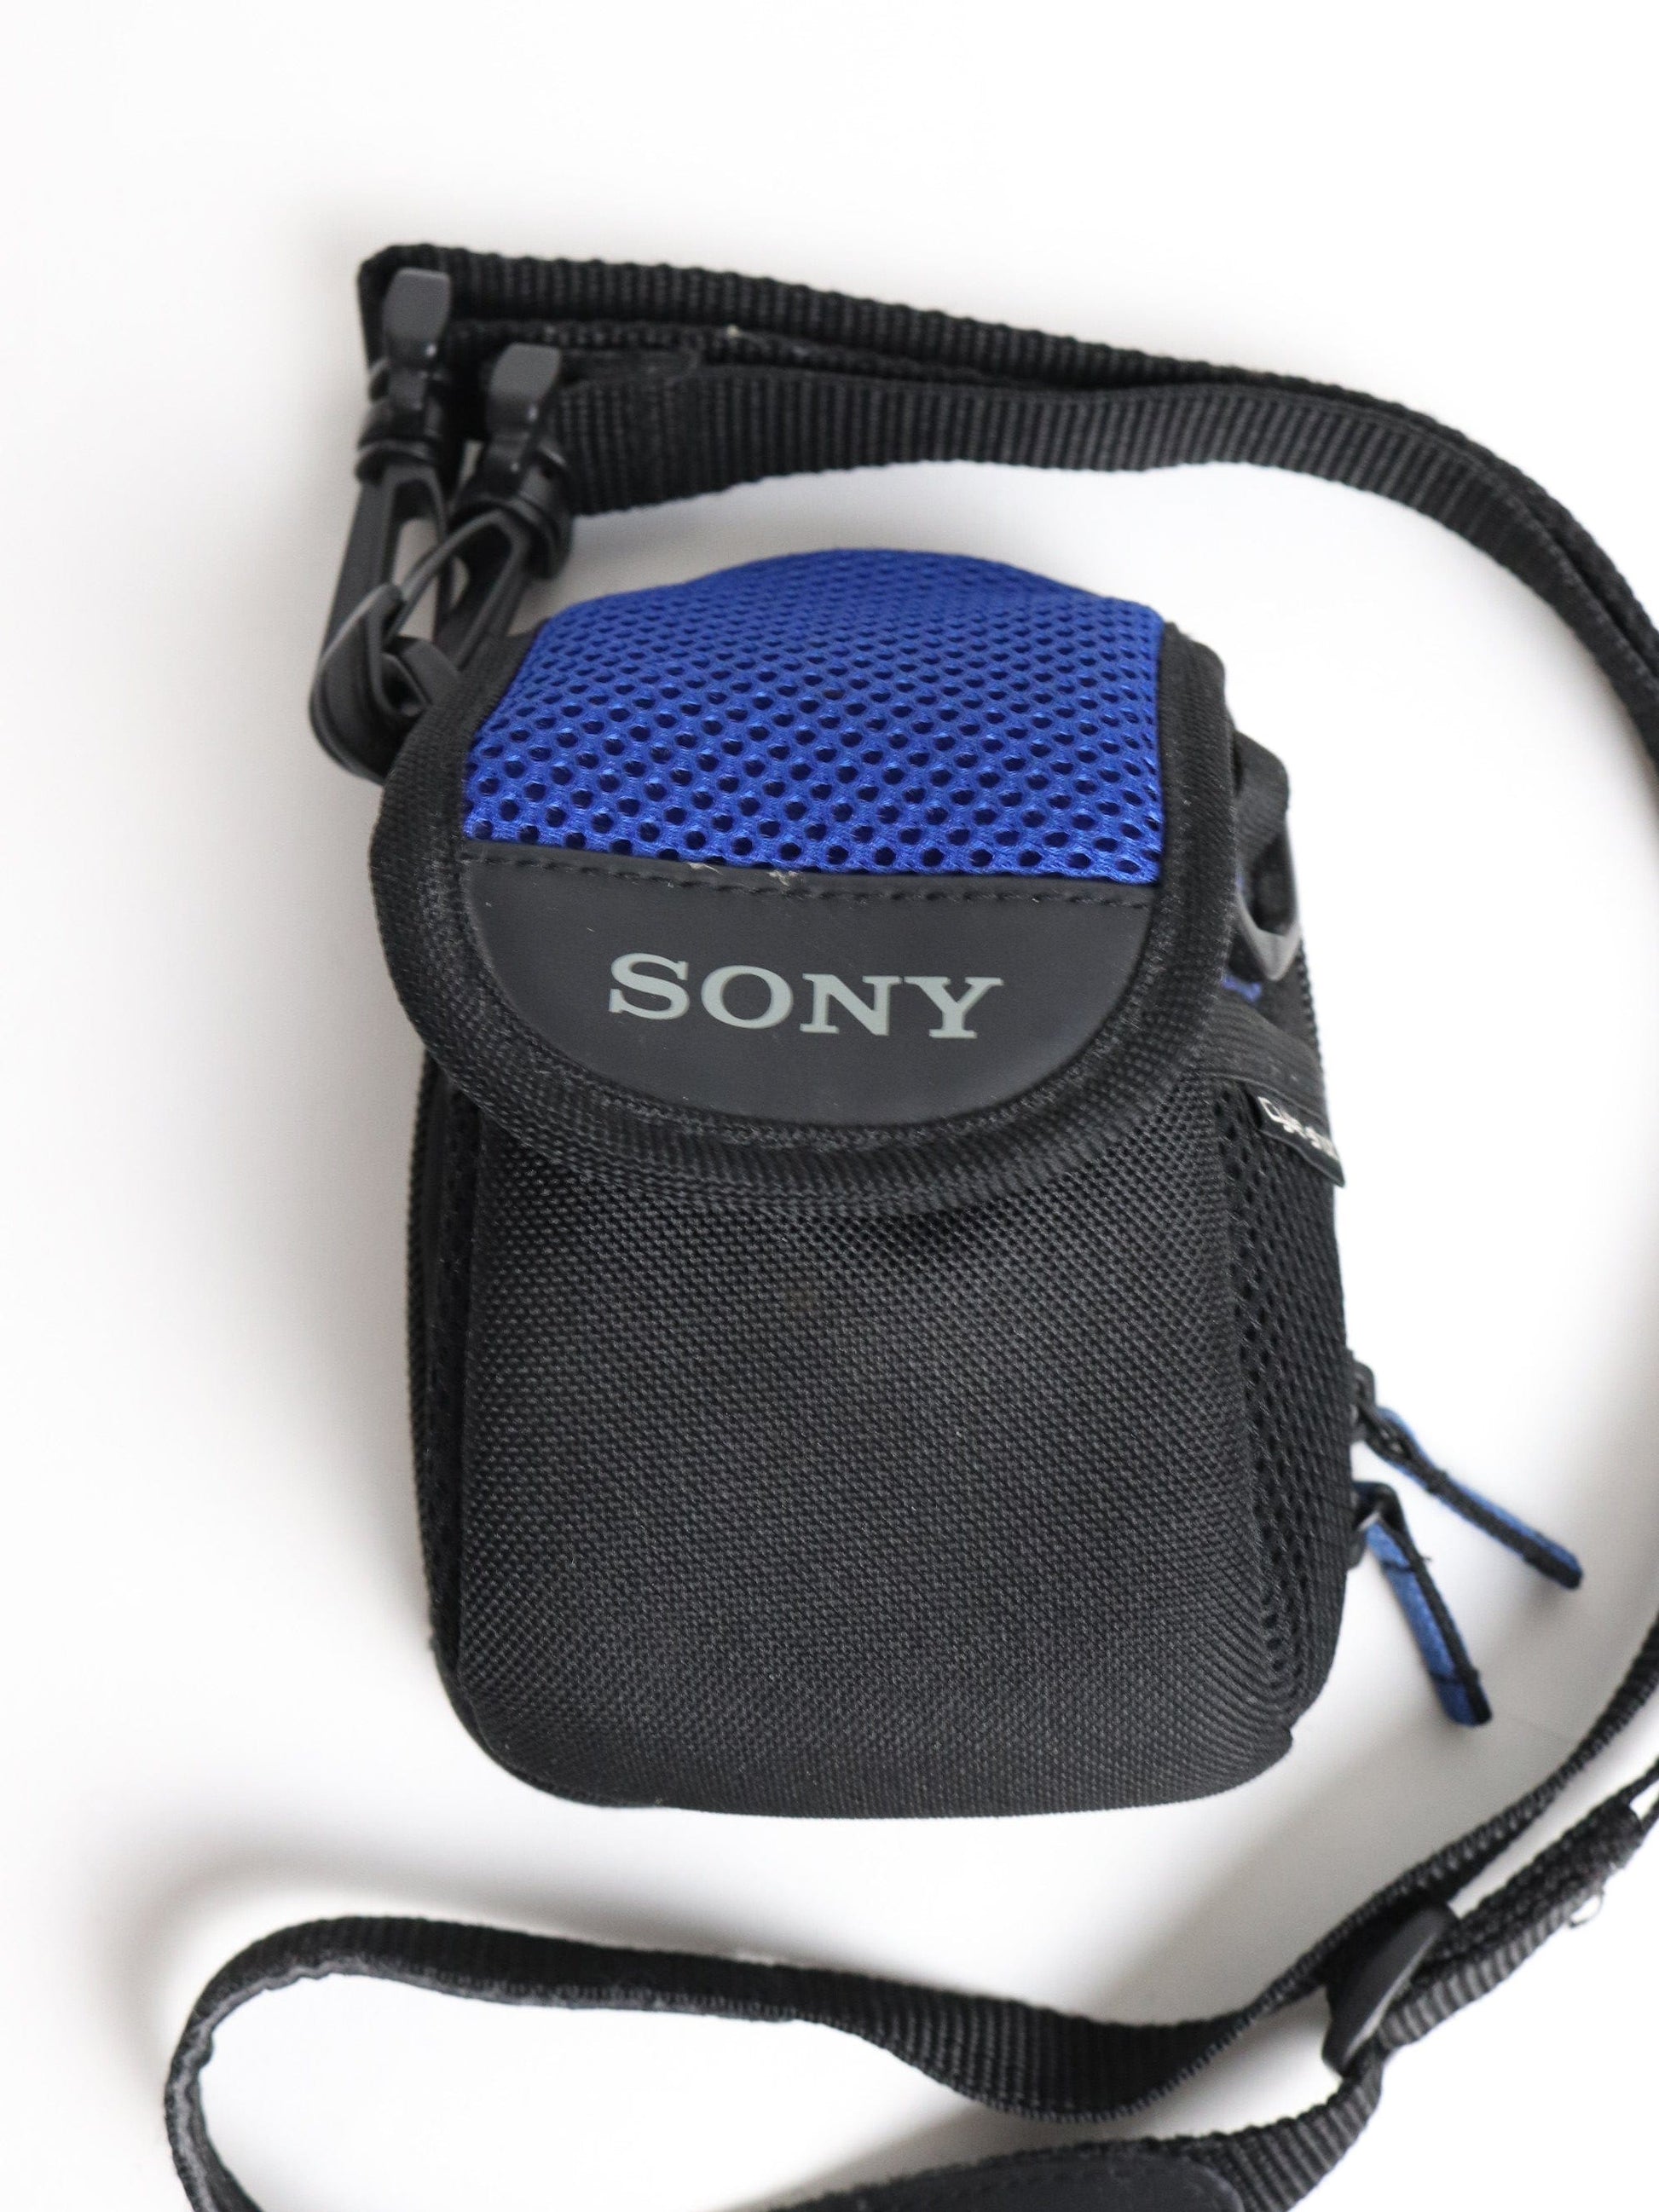 Sony Accessories Vintage Sony Pouch Bag Camera Cyber Shot Y2K